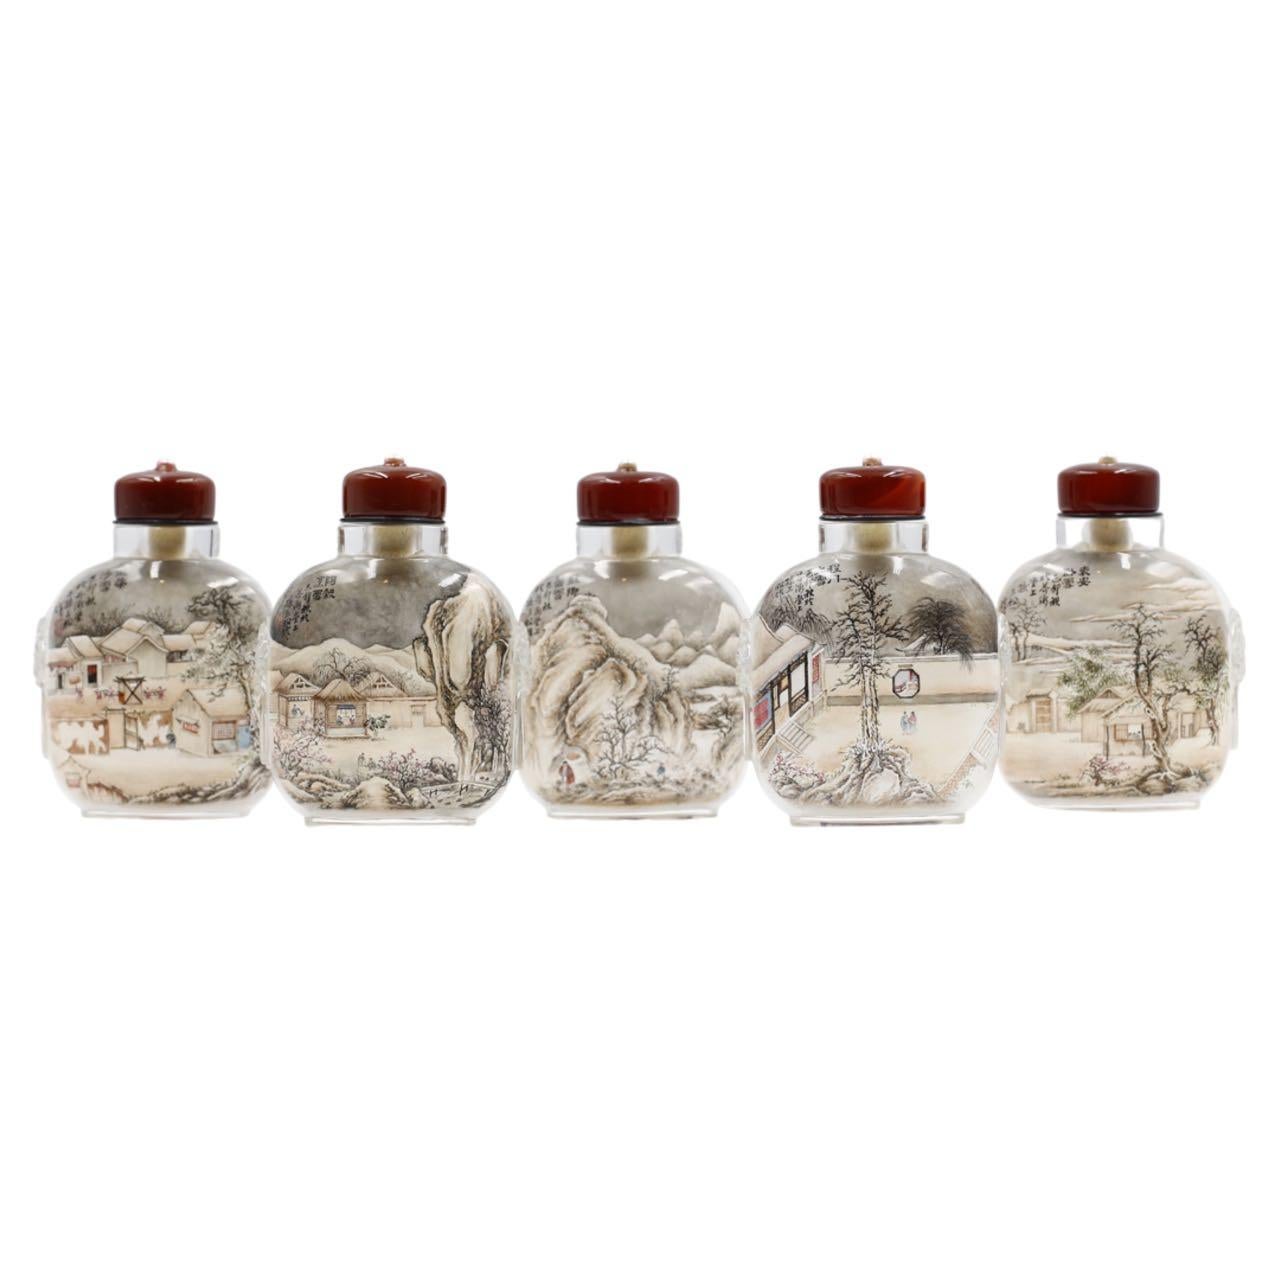 Modern Inside Painted Snuff Bottles, Ten Pieces Snow Landscapes by Sun Sansong 1999 For Sale